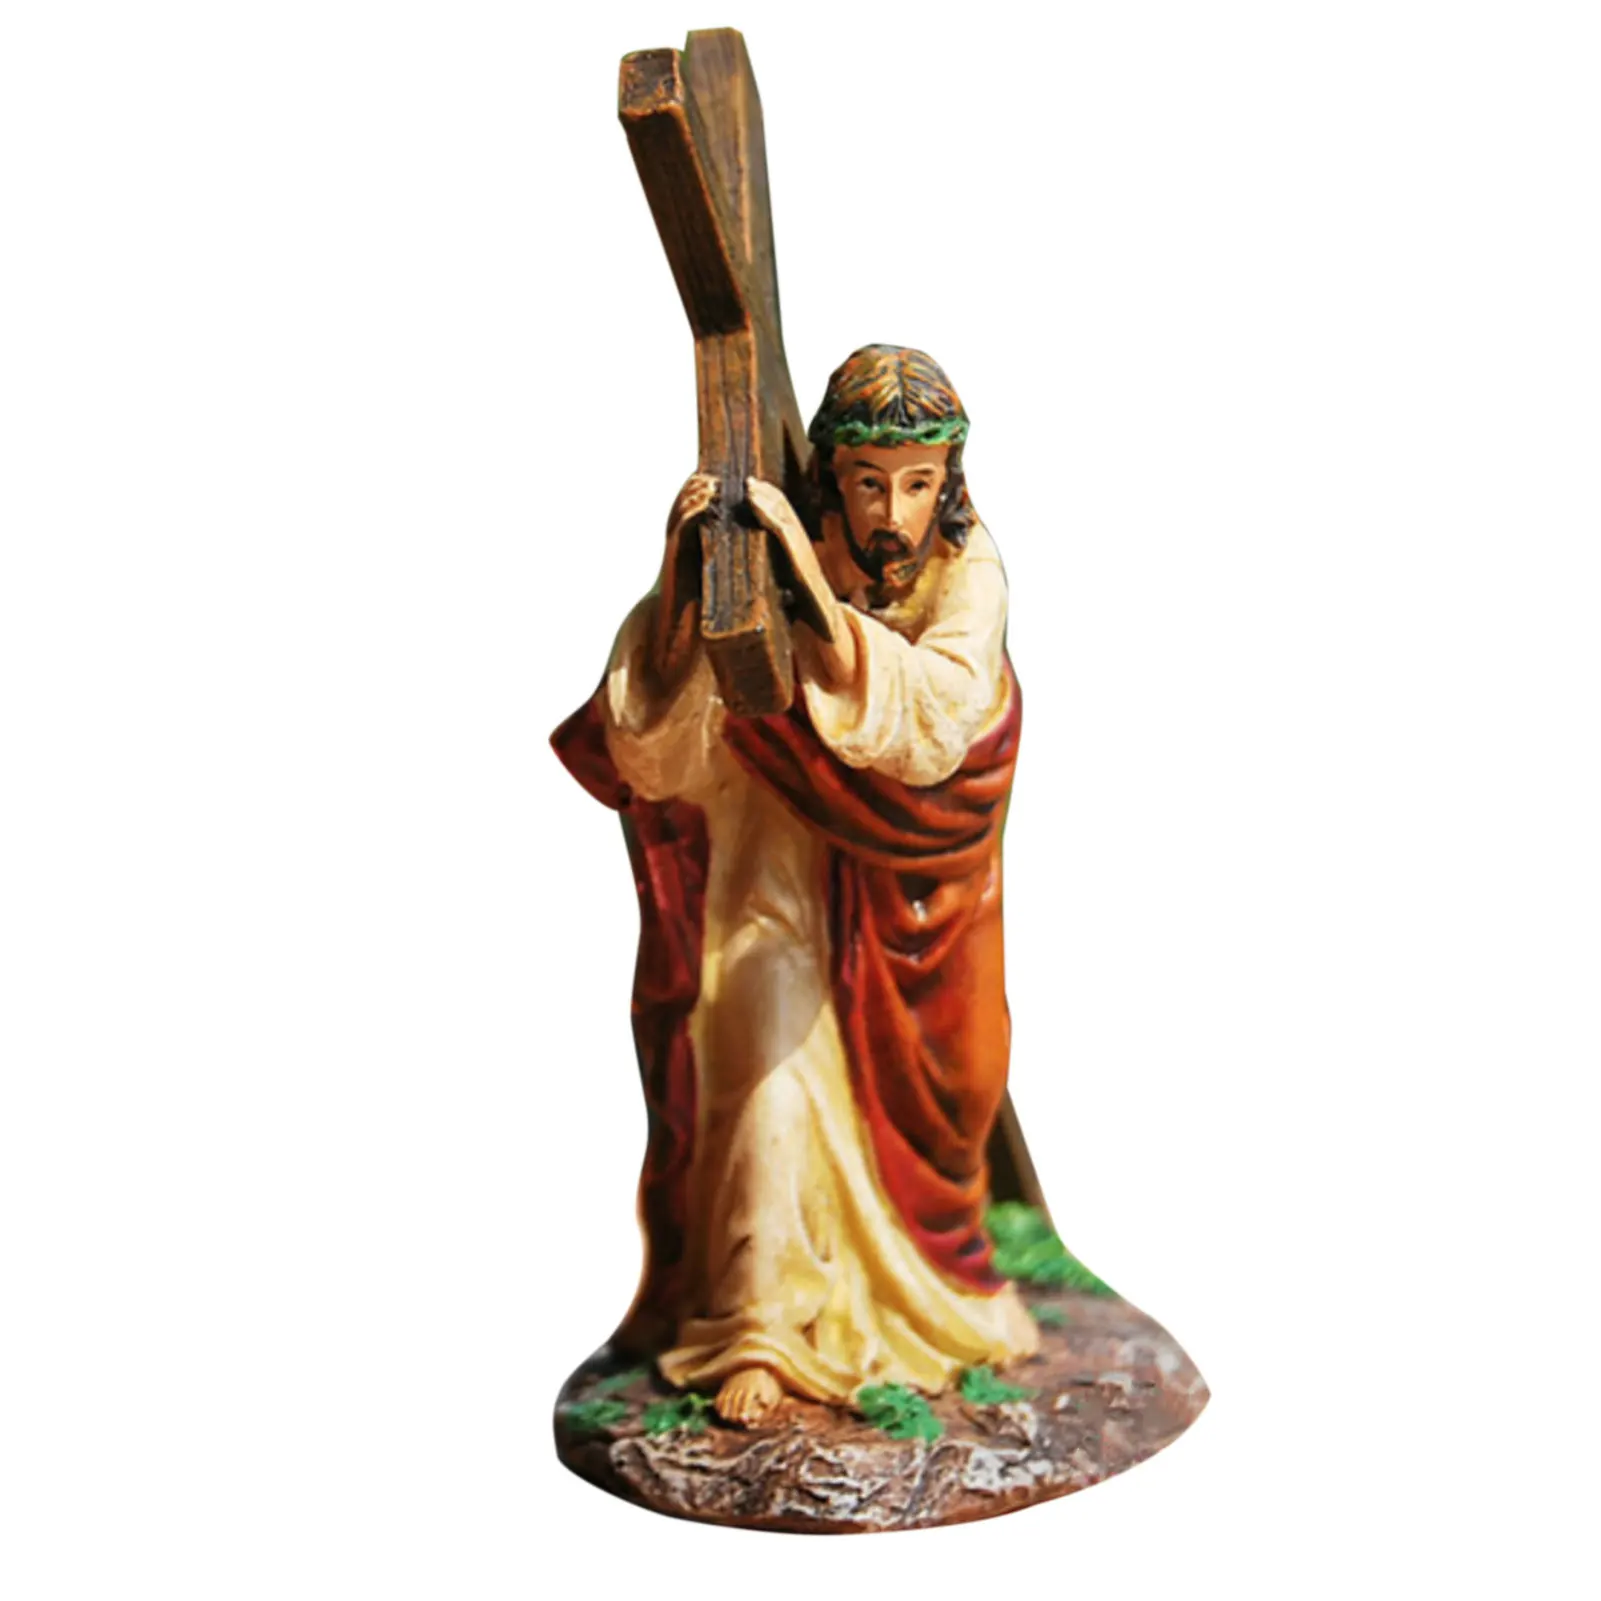 Jesus Cross Crucifix Figurines Religious Statues Christian Ornament Holy Catholic Crafts For Home Office Easter Resin Jewelry